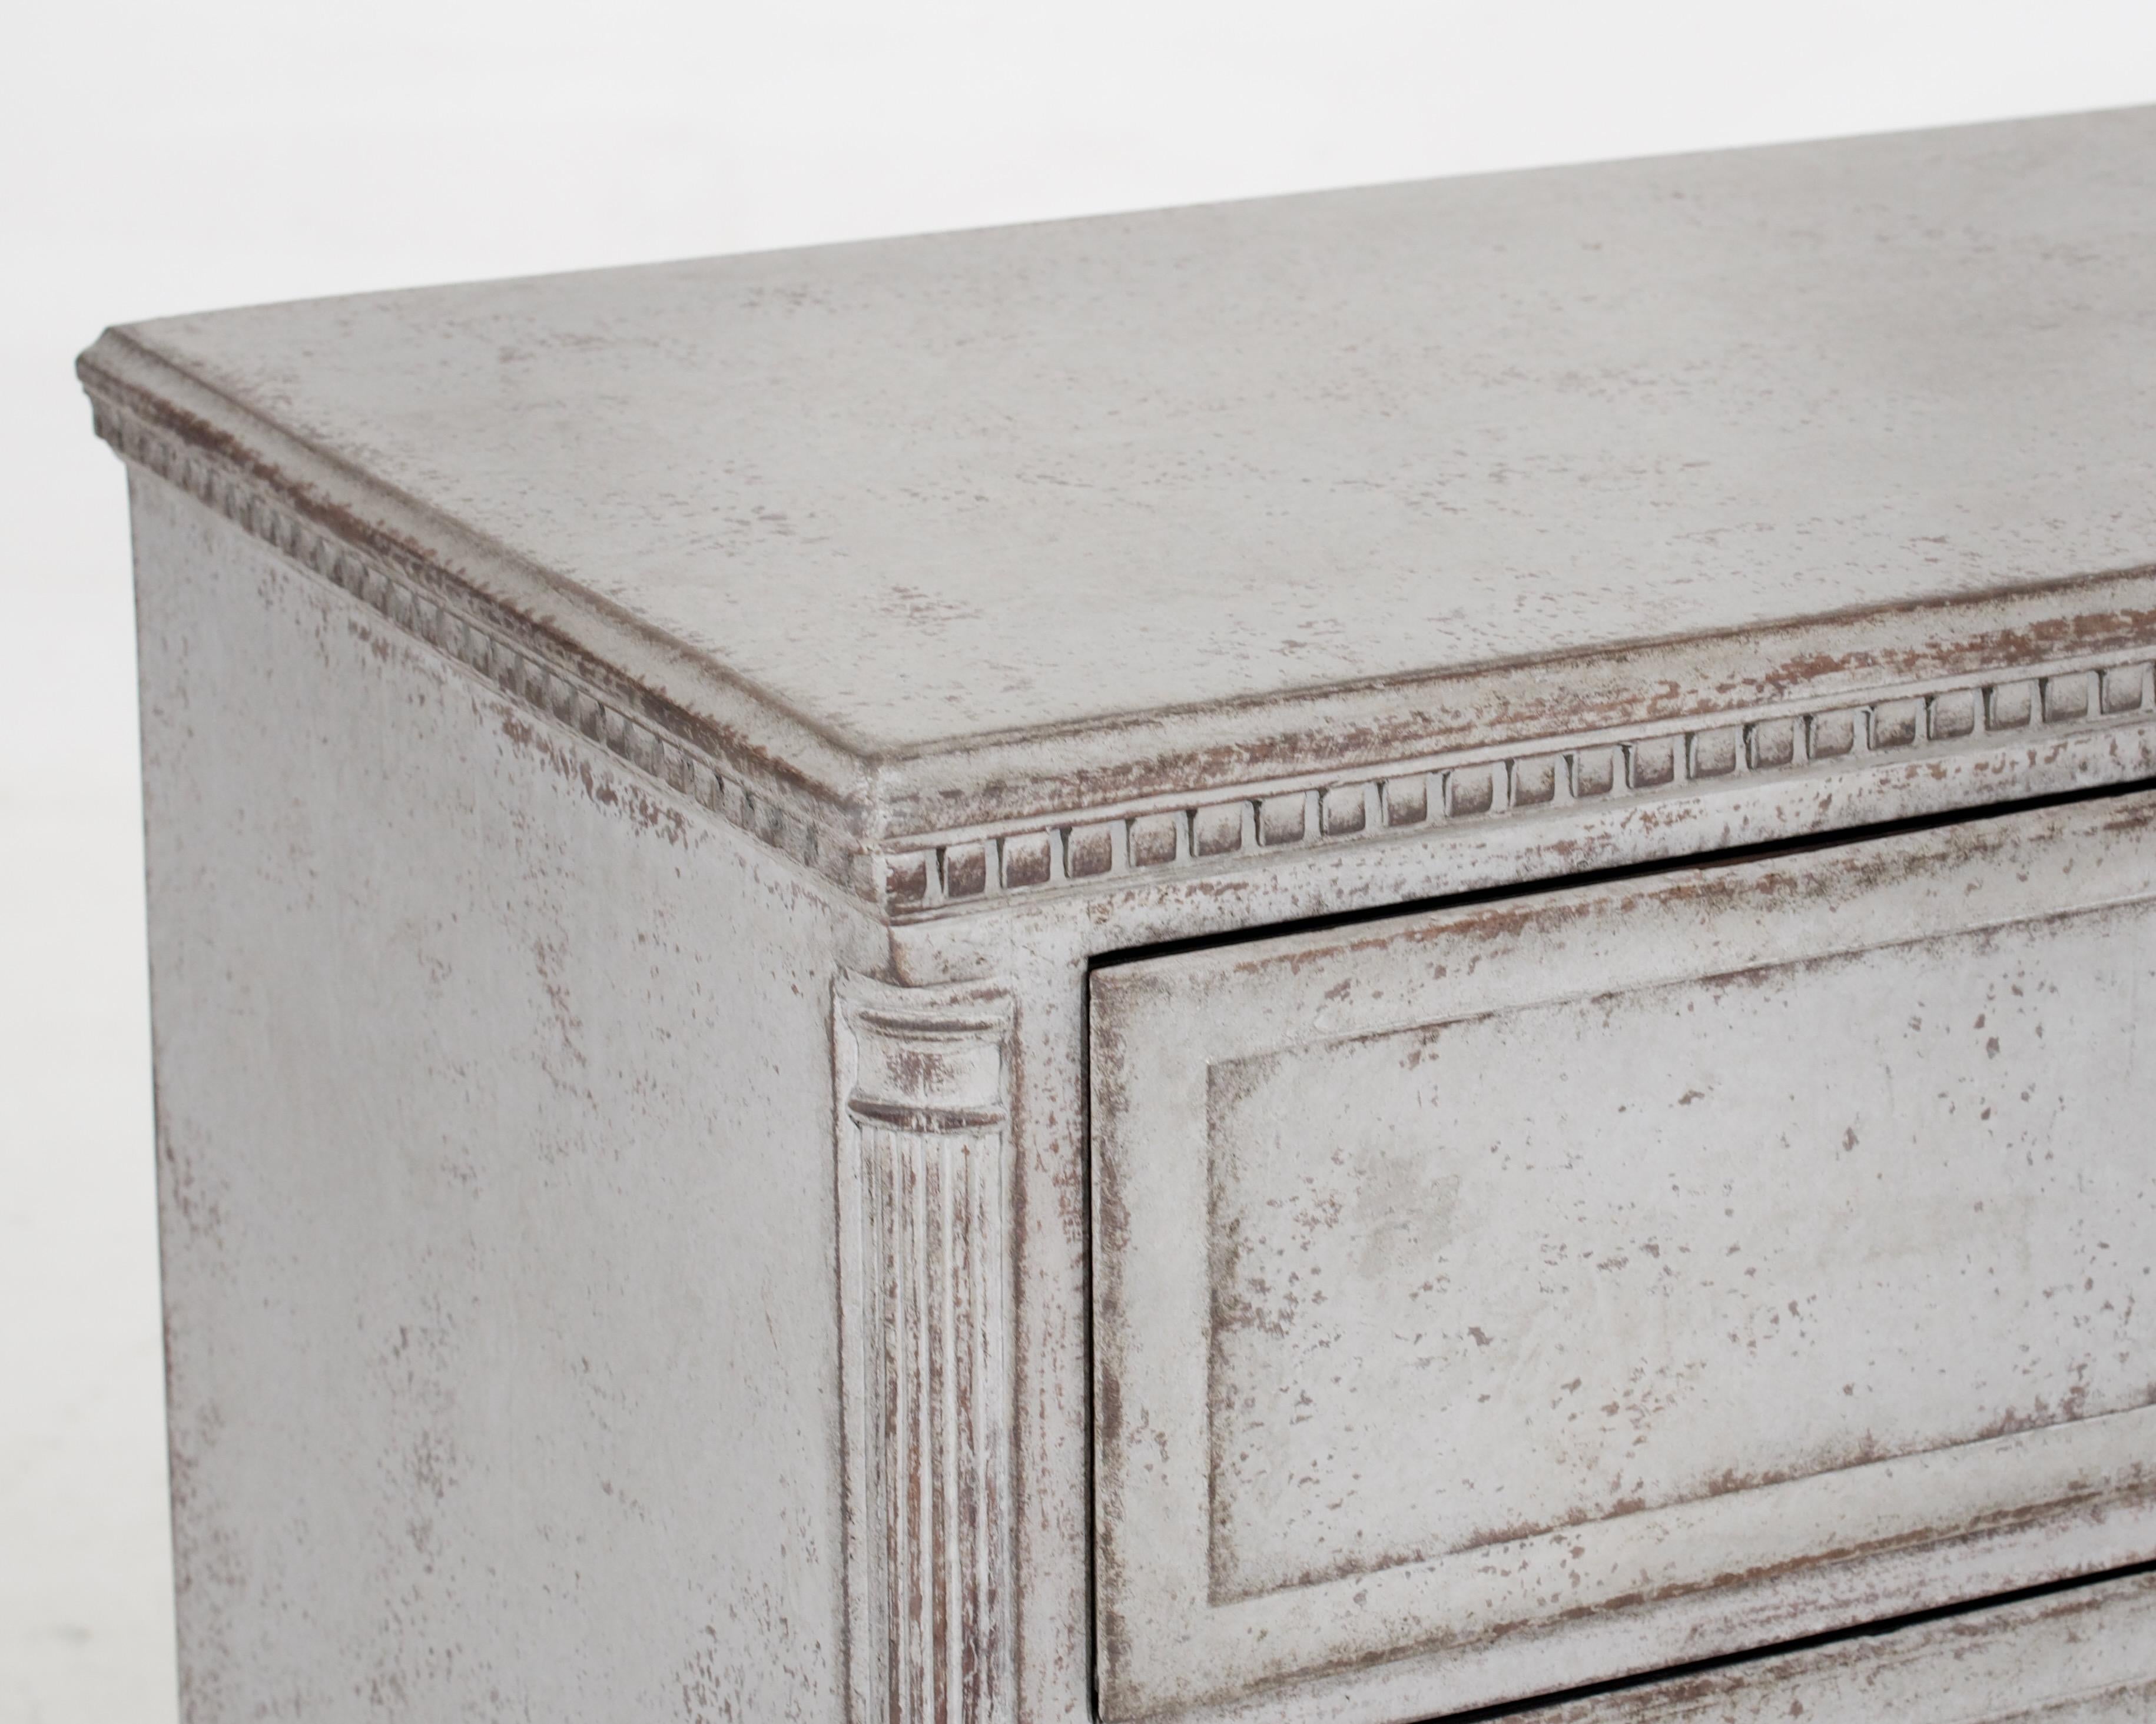 A 1790 Scandinavian Gustavian chest with three drawers, finely carved columns, and original locks exudes a timeless appeal.